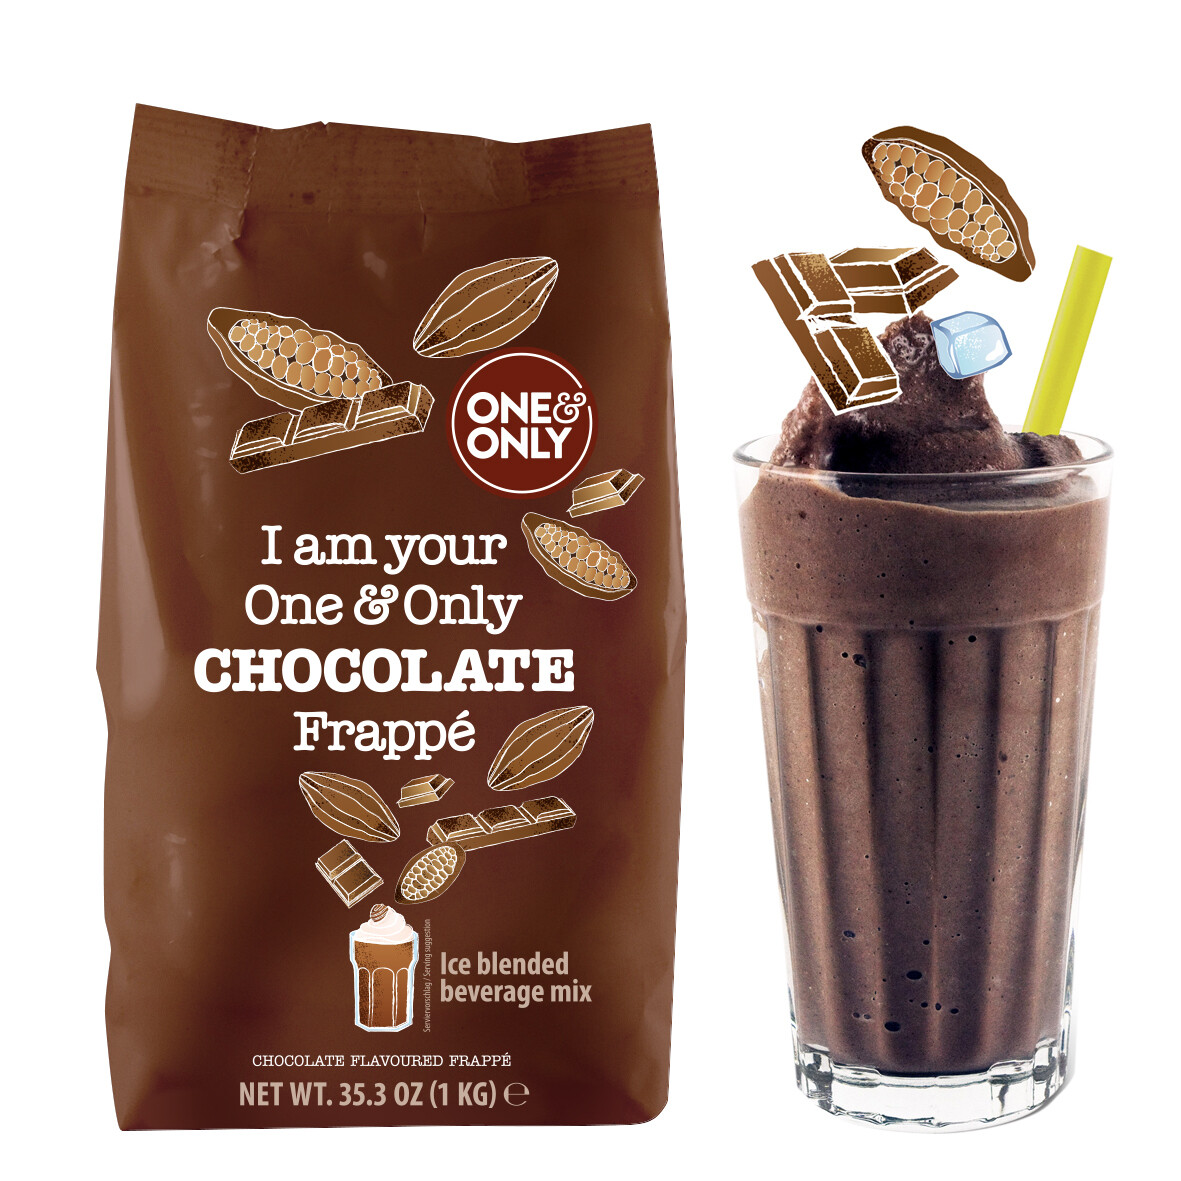 One&Only Frappé Powder Chocolate Flavoured